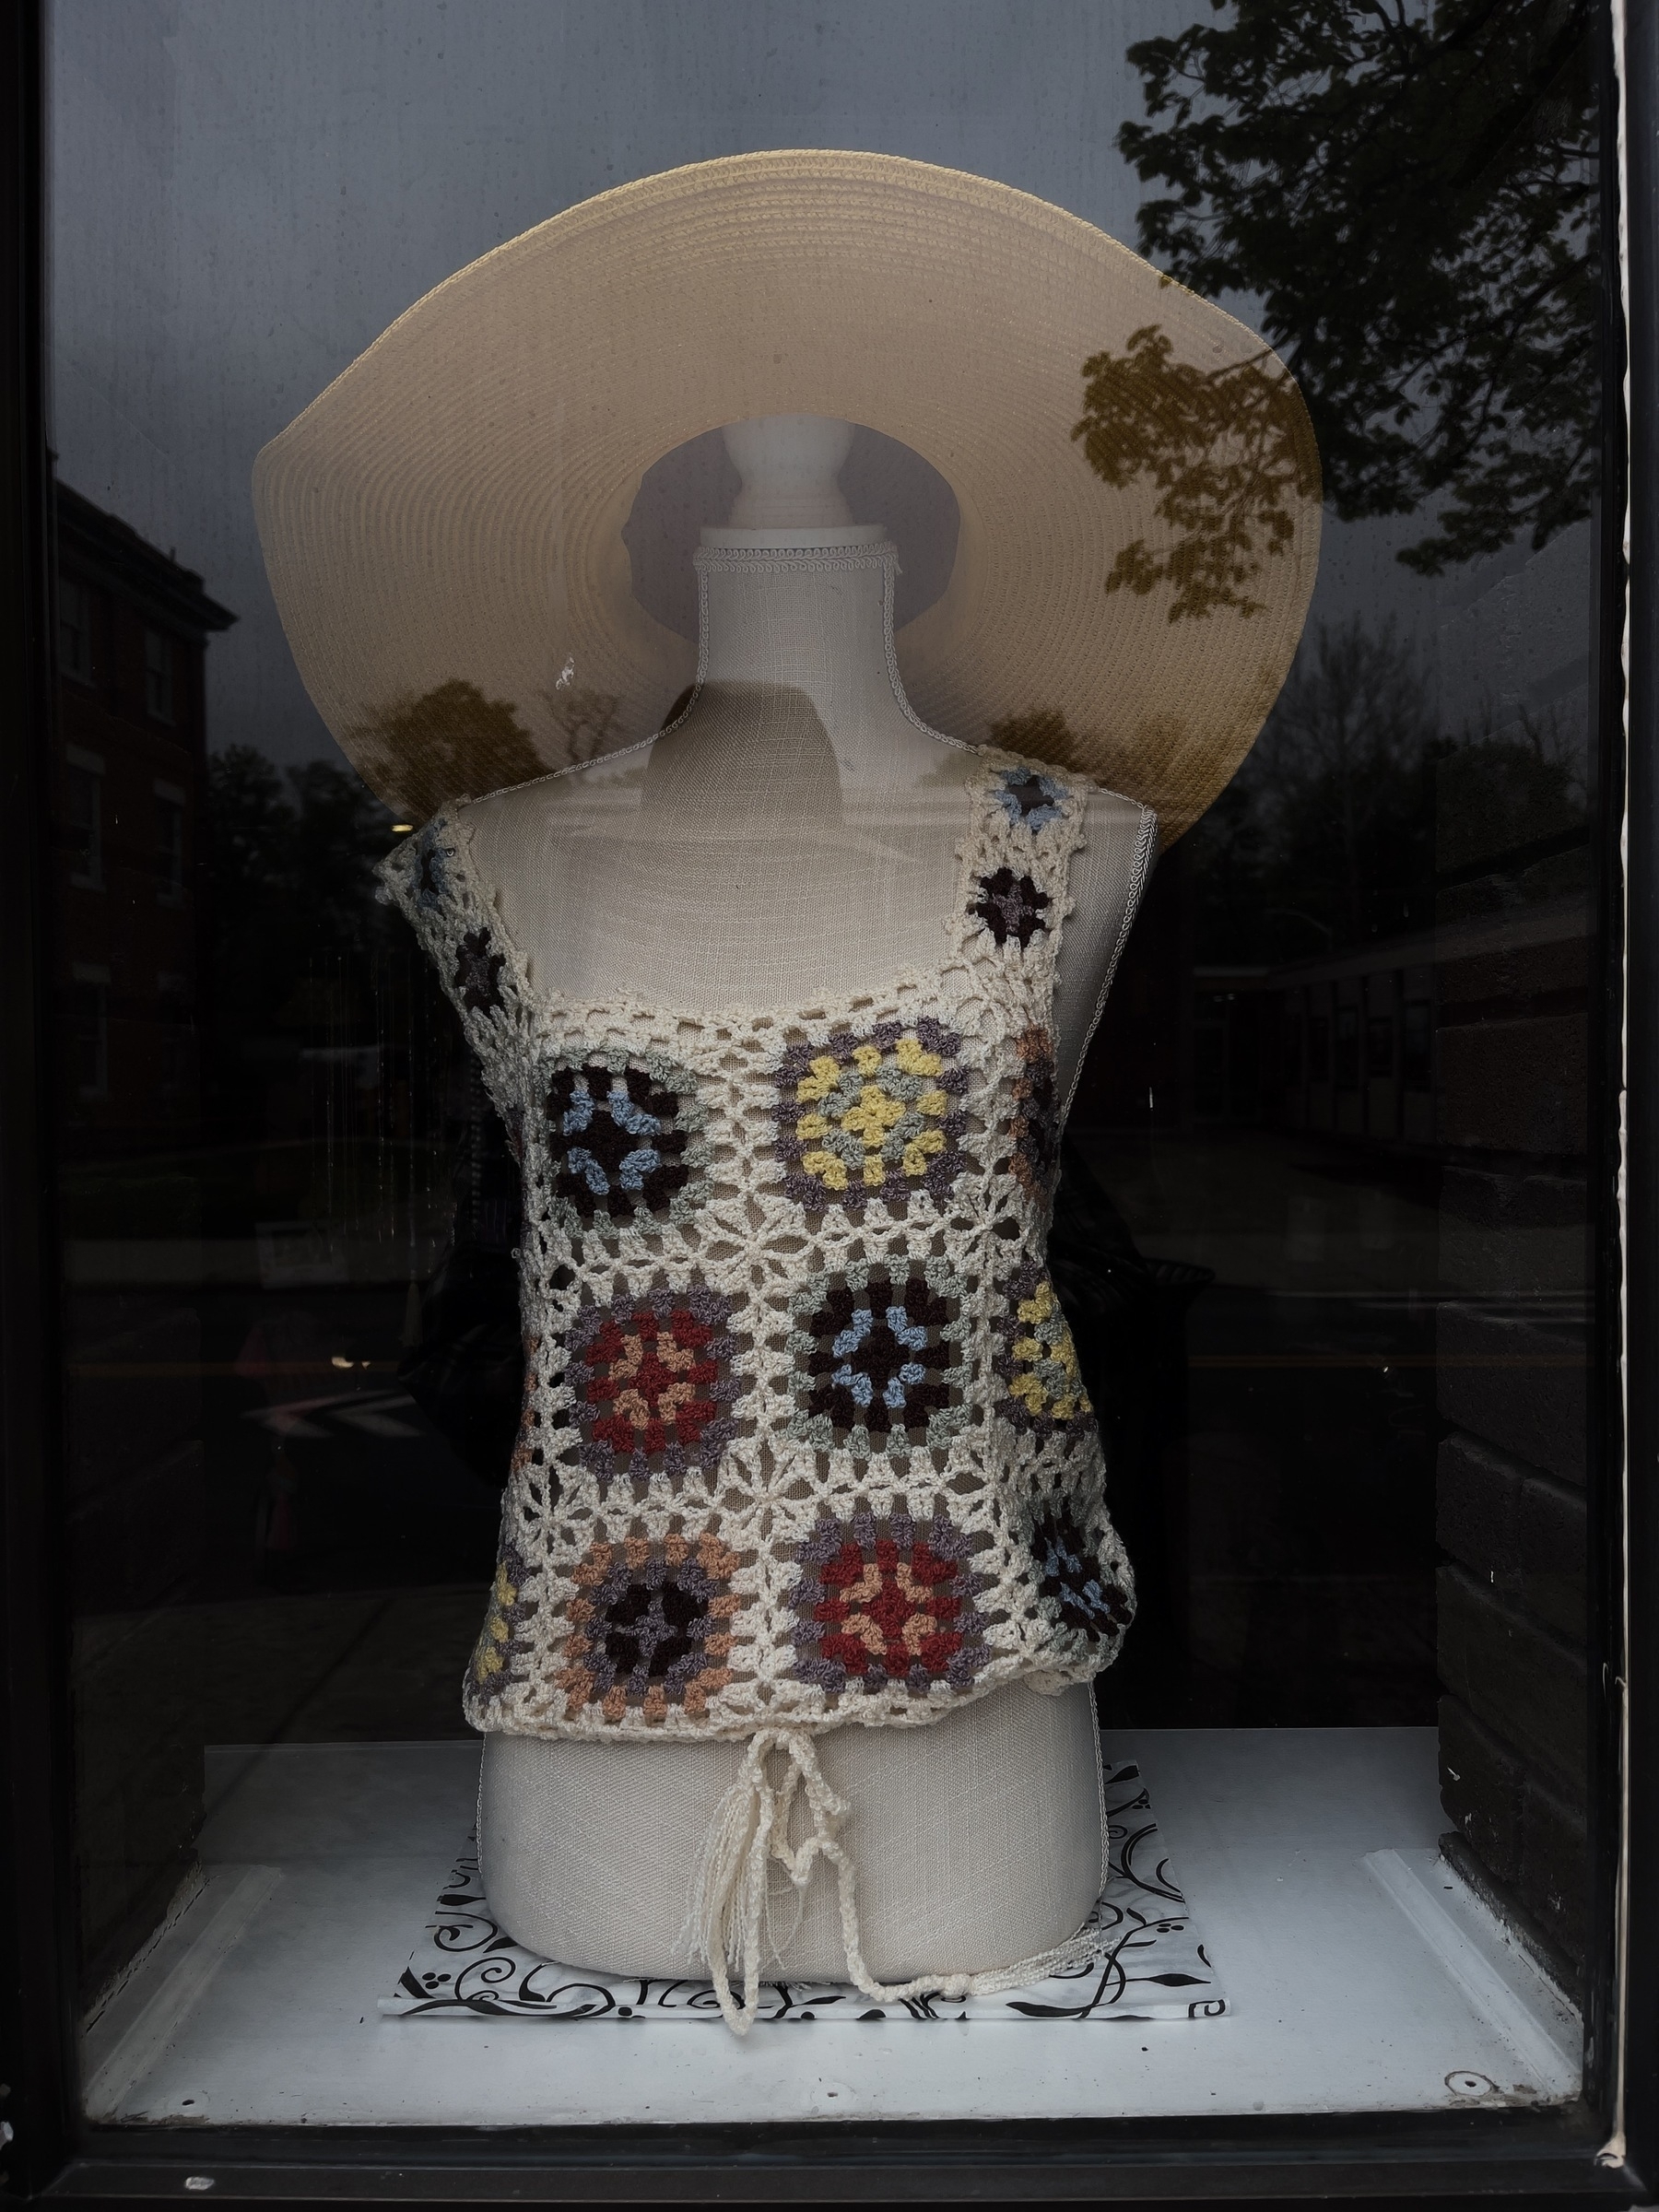 Crocheted woman’s top and wide brim sun hat on a mannequin bust in a shop window.